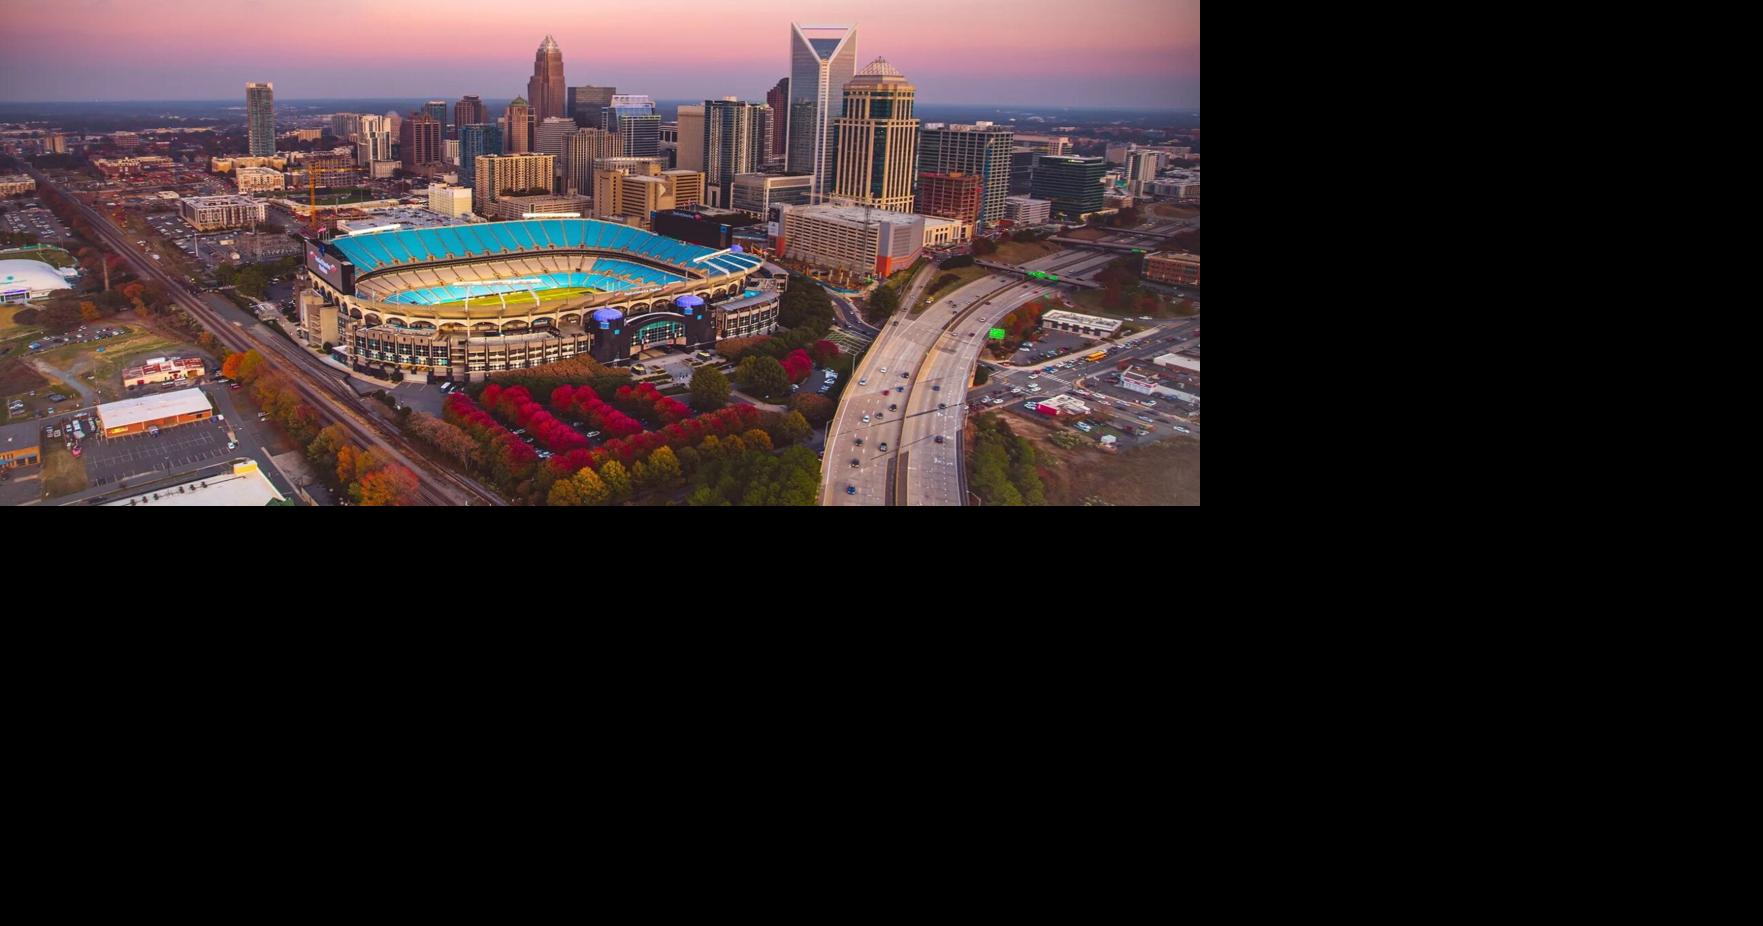 Charlotte's pro sports profile continues to grow, but no MLB team